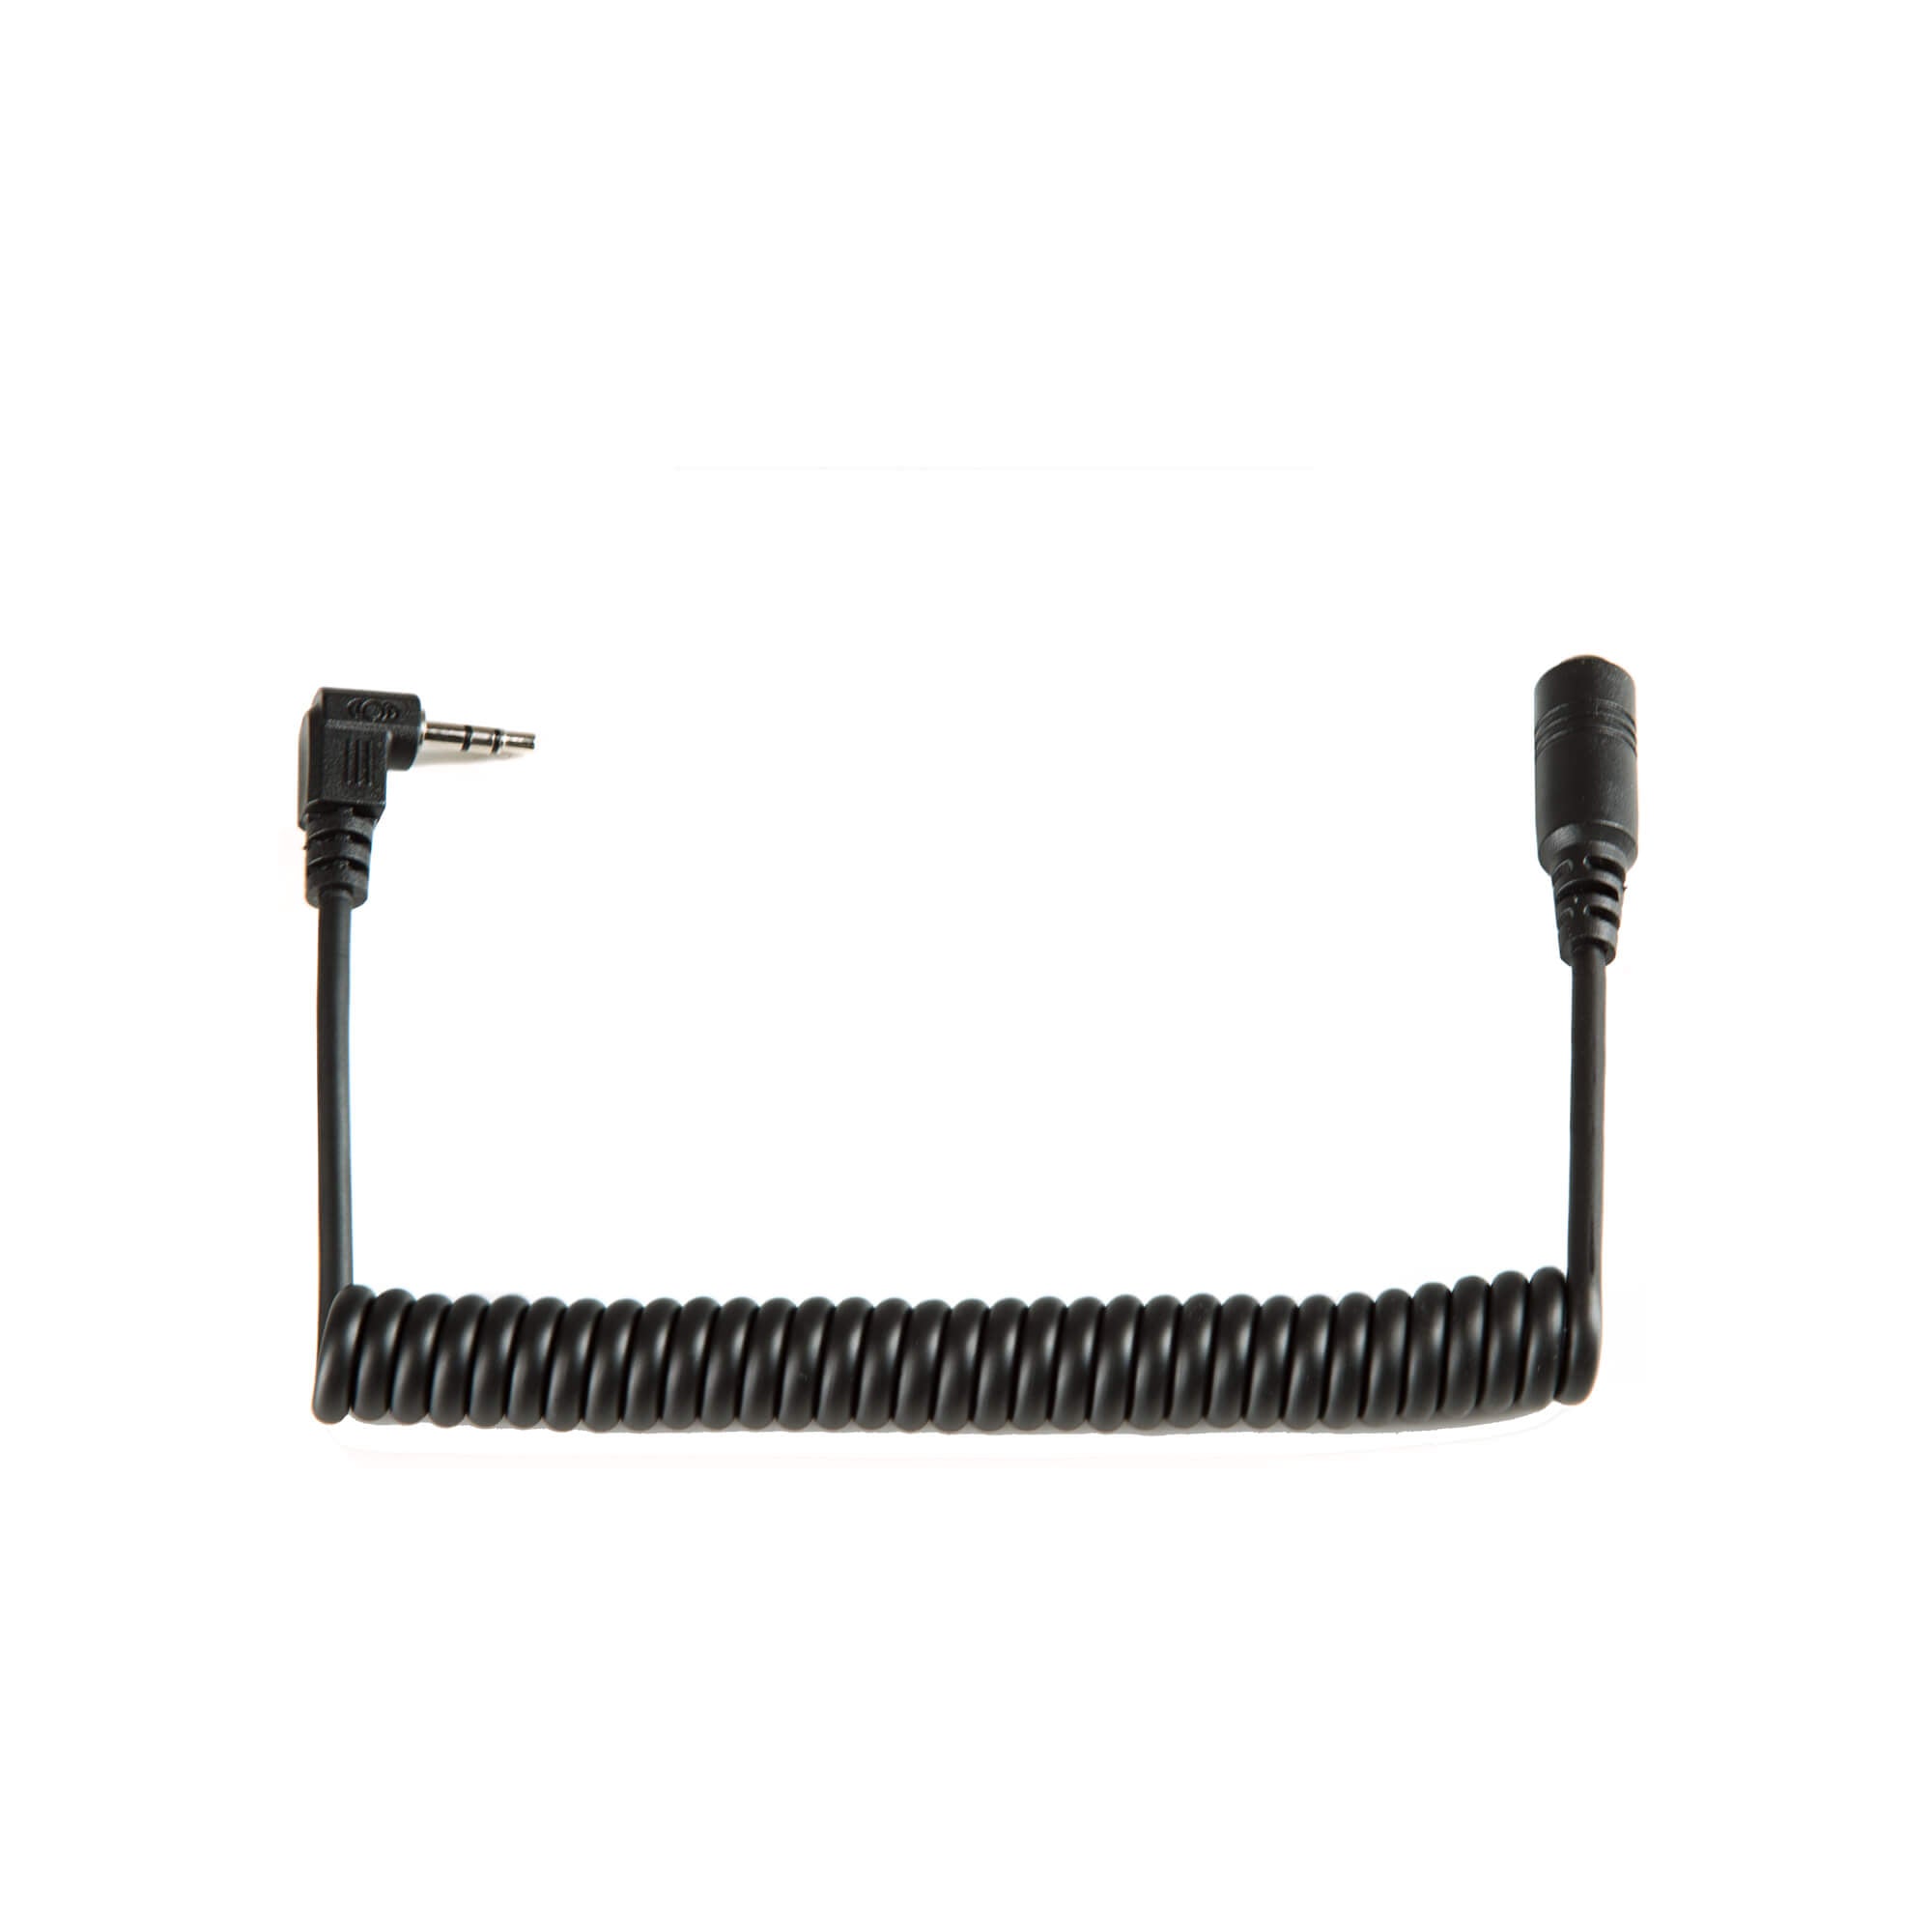 SHAPE Remote Extension Handle with Cable for Sony FS5/FS5 II